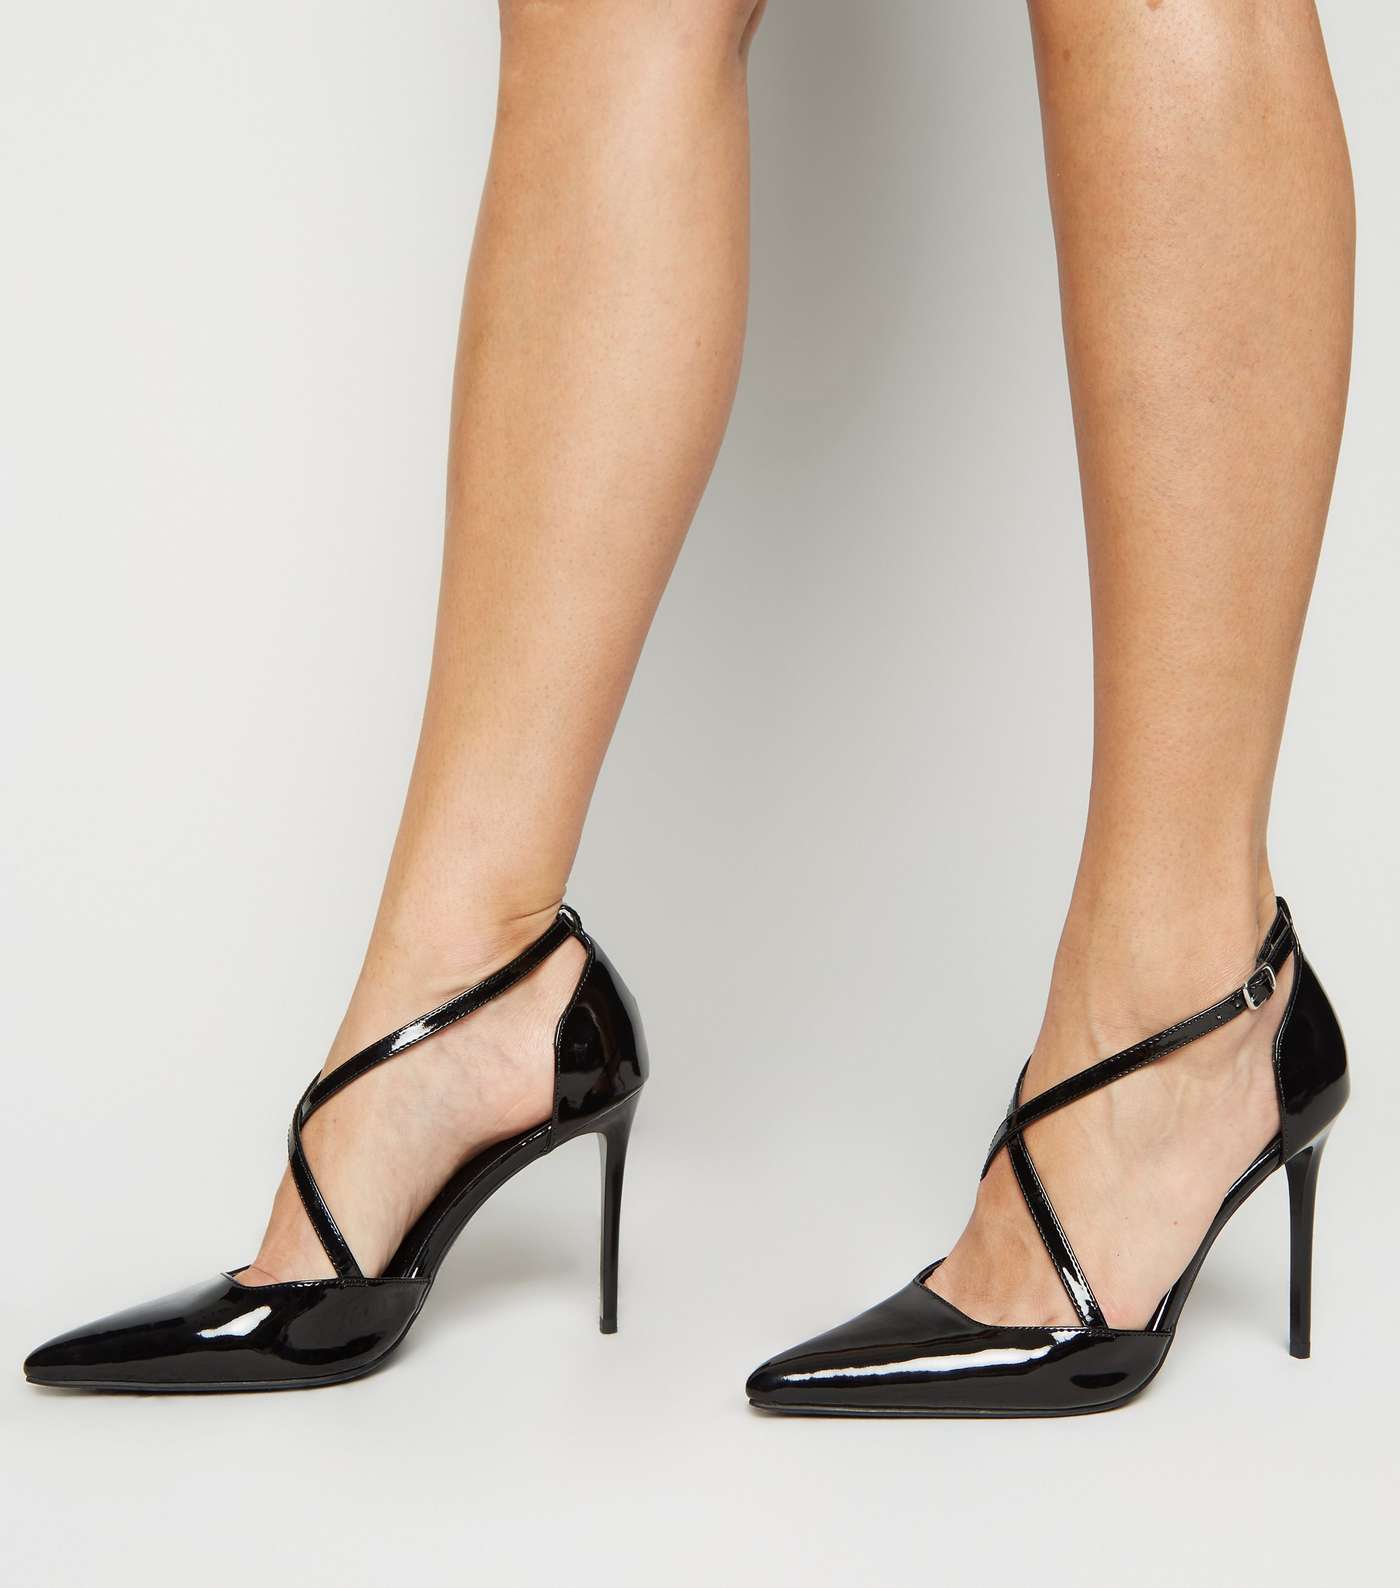 Black Patent Cross Strap Pointed Stiletto Courts Image 2